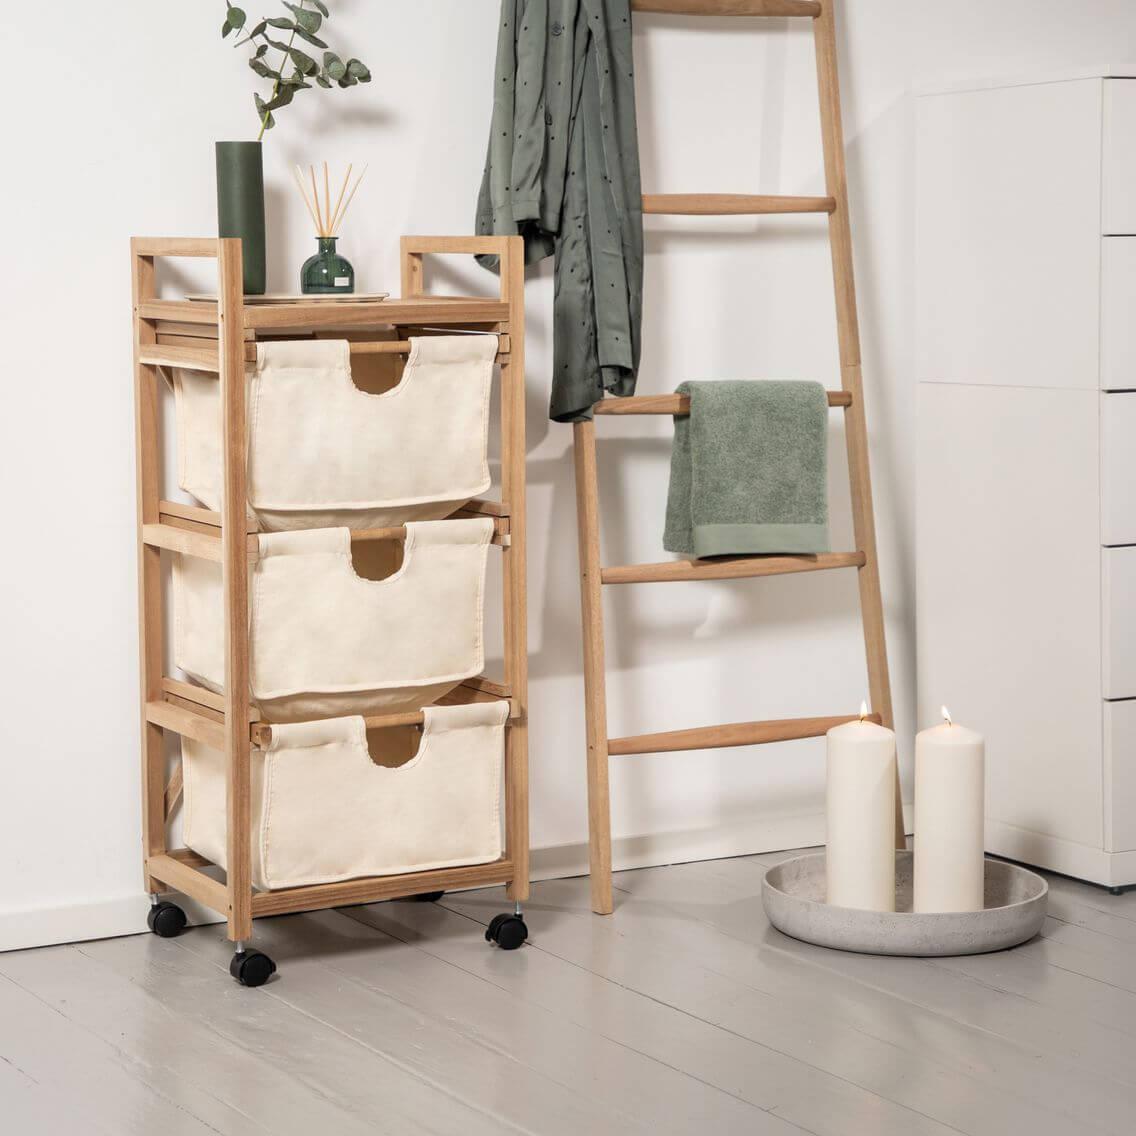 FSC certified timber storage trolley and towel storage ladder